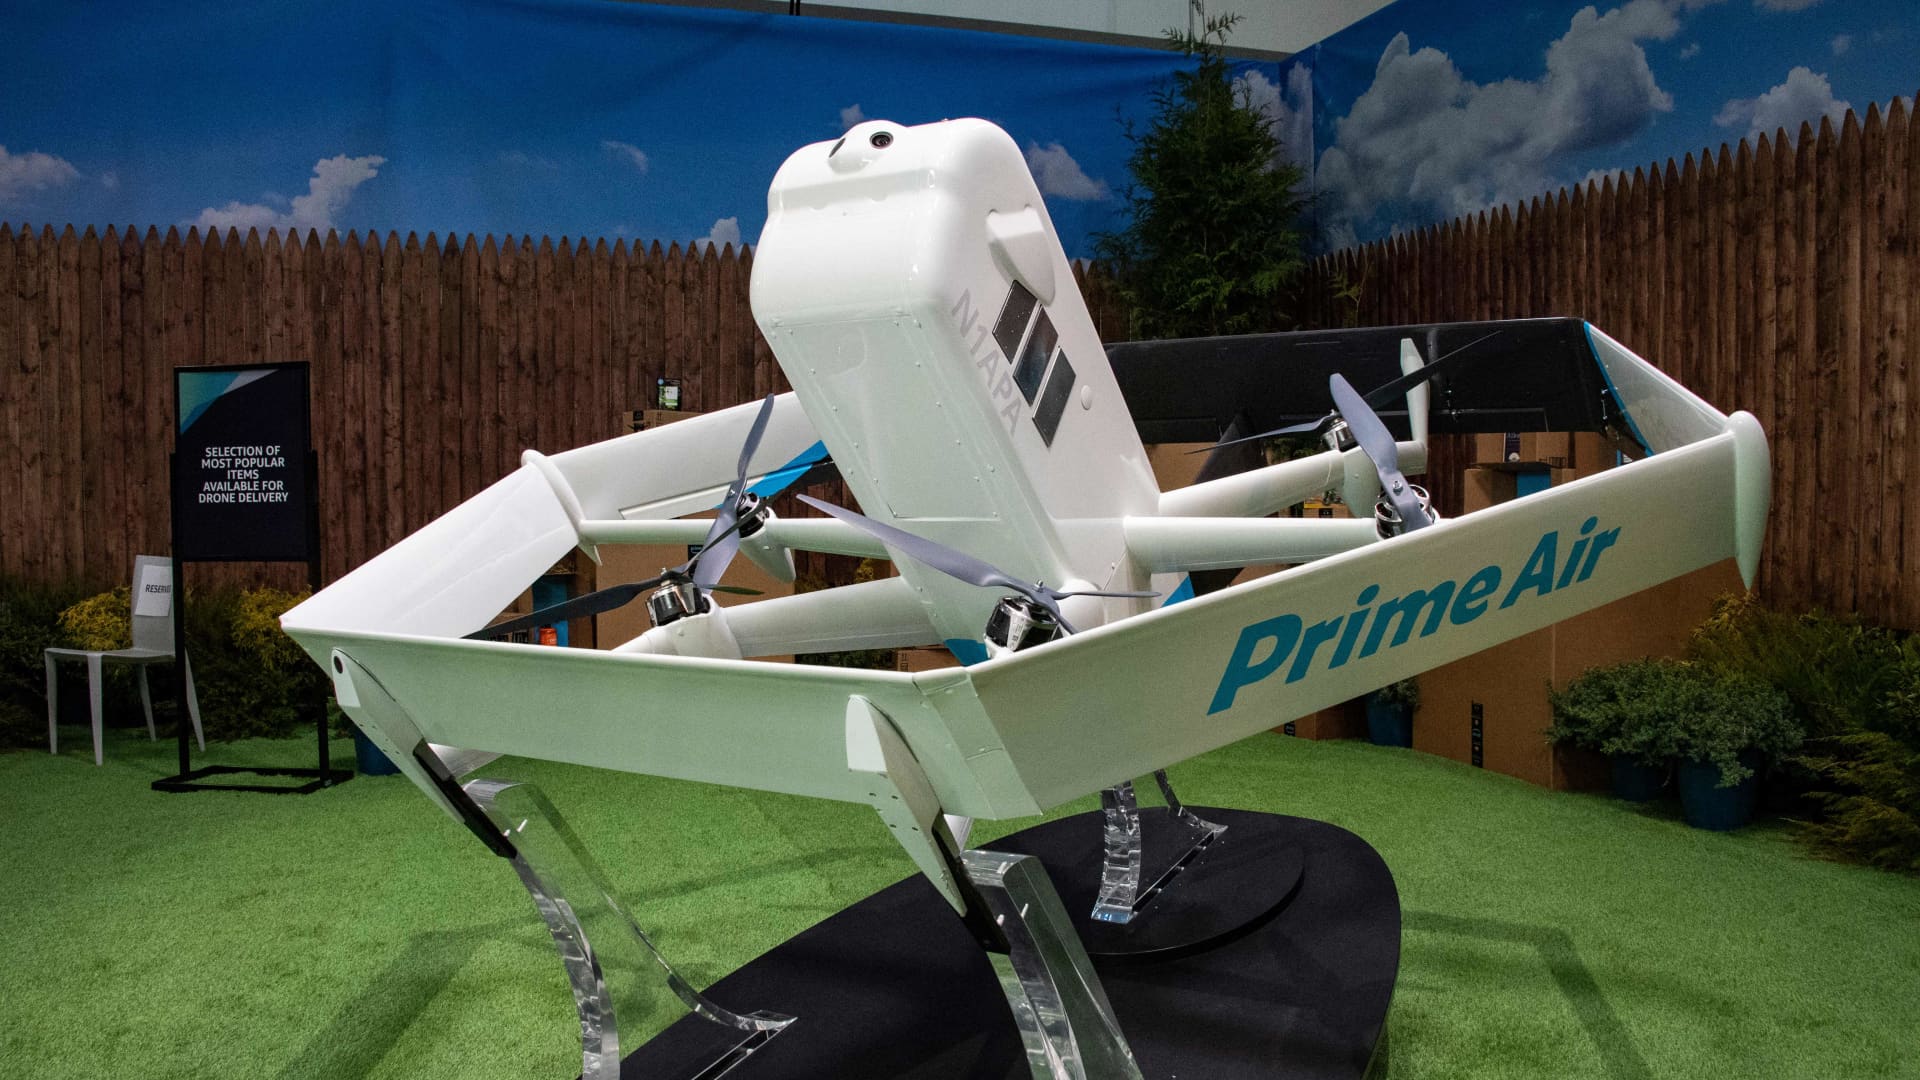 The Amazon drone delivery manager who oversaw FAA relations is leaving